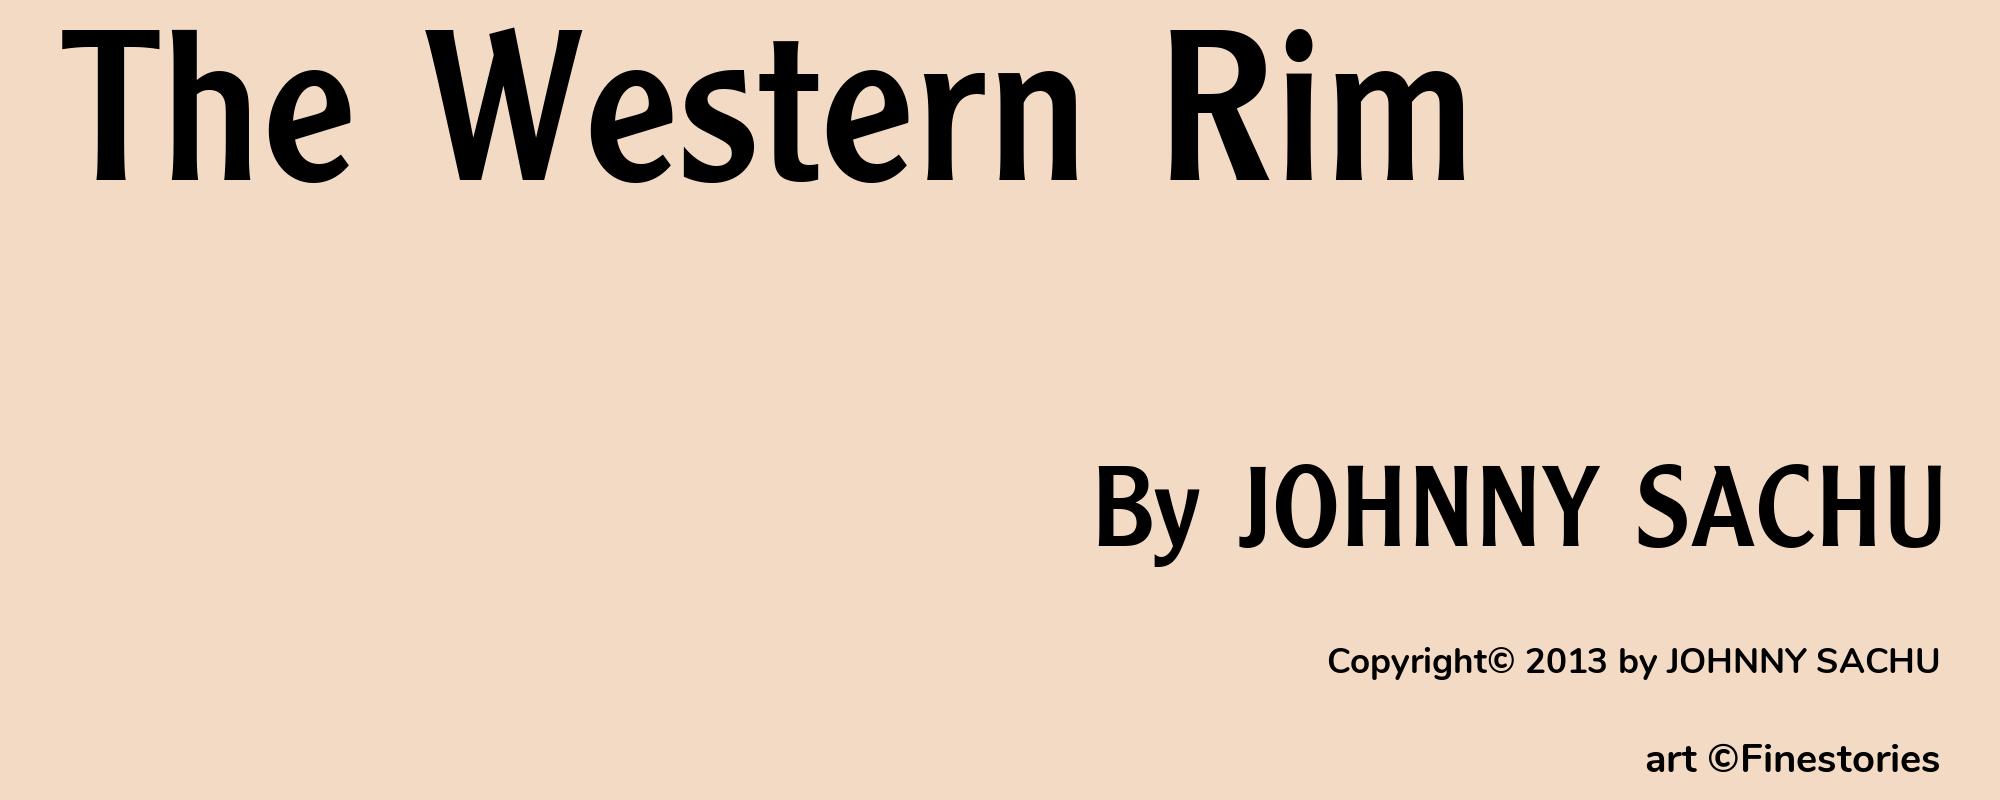 The Western Rim - Cover